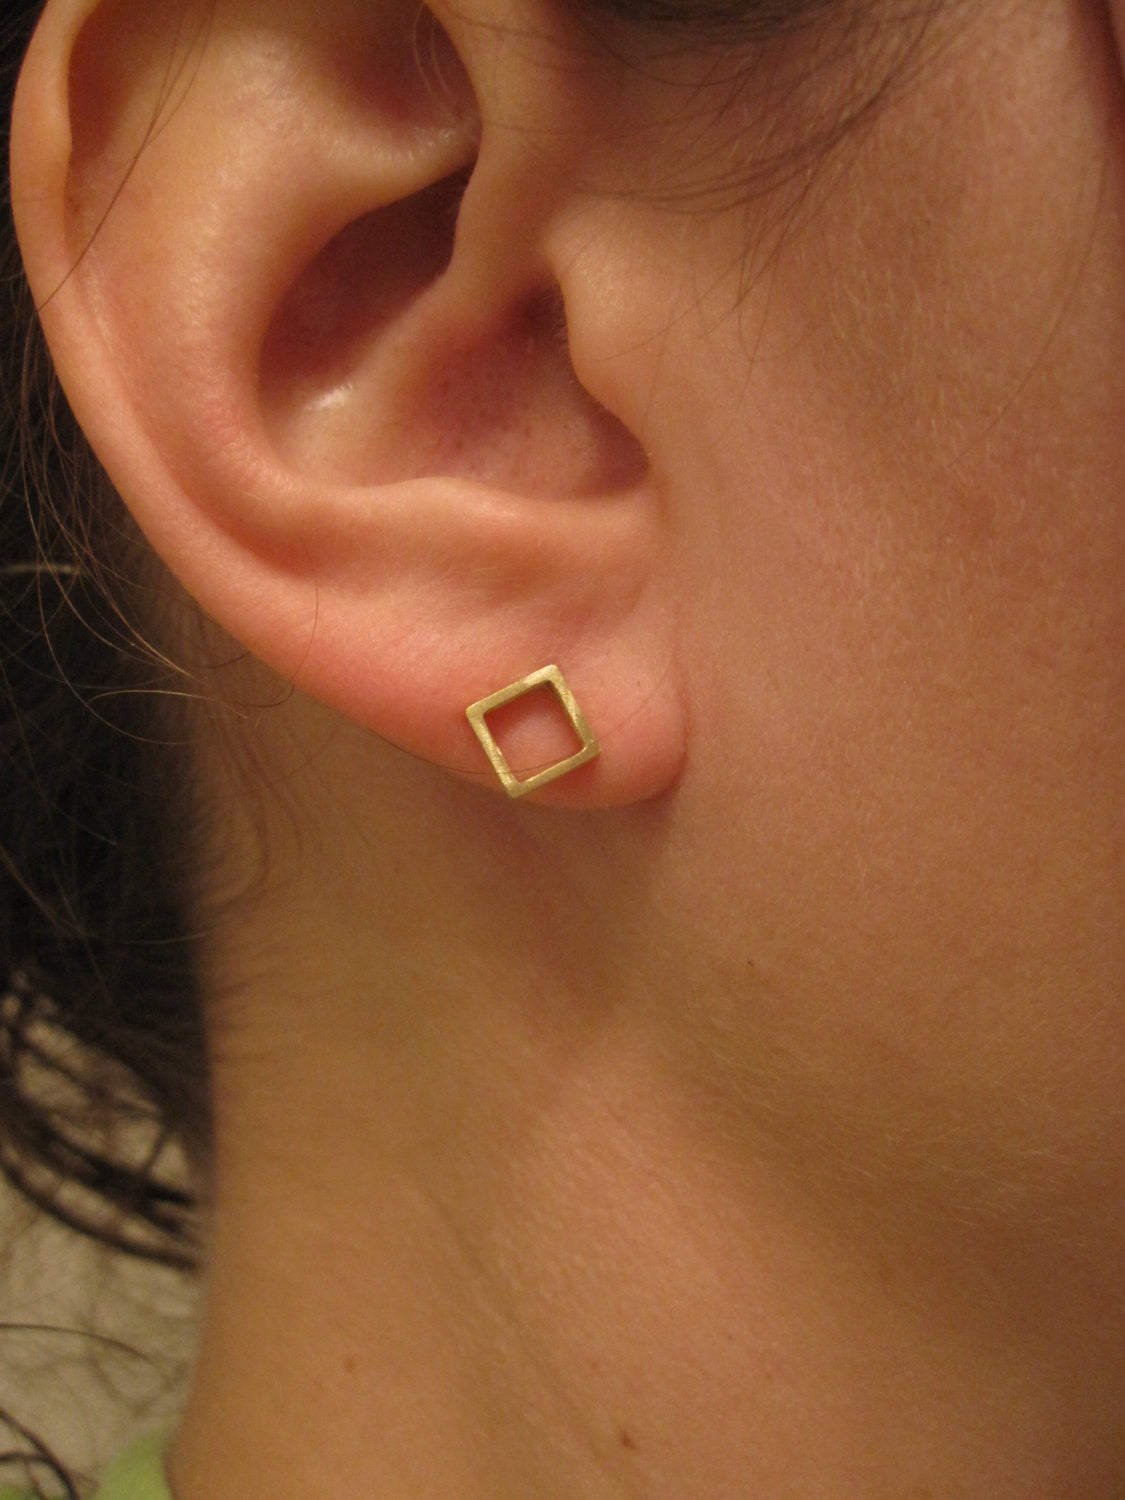 Open Hand-Made Square Cube Stud Earrings in Gold Colored Brass - 0124 - Virginia Wynne Designs